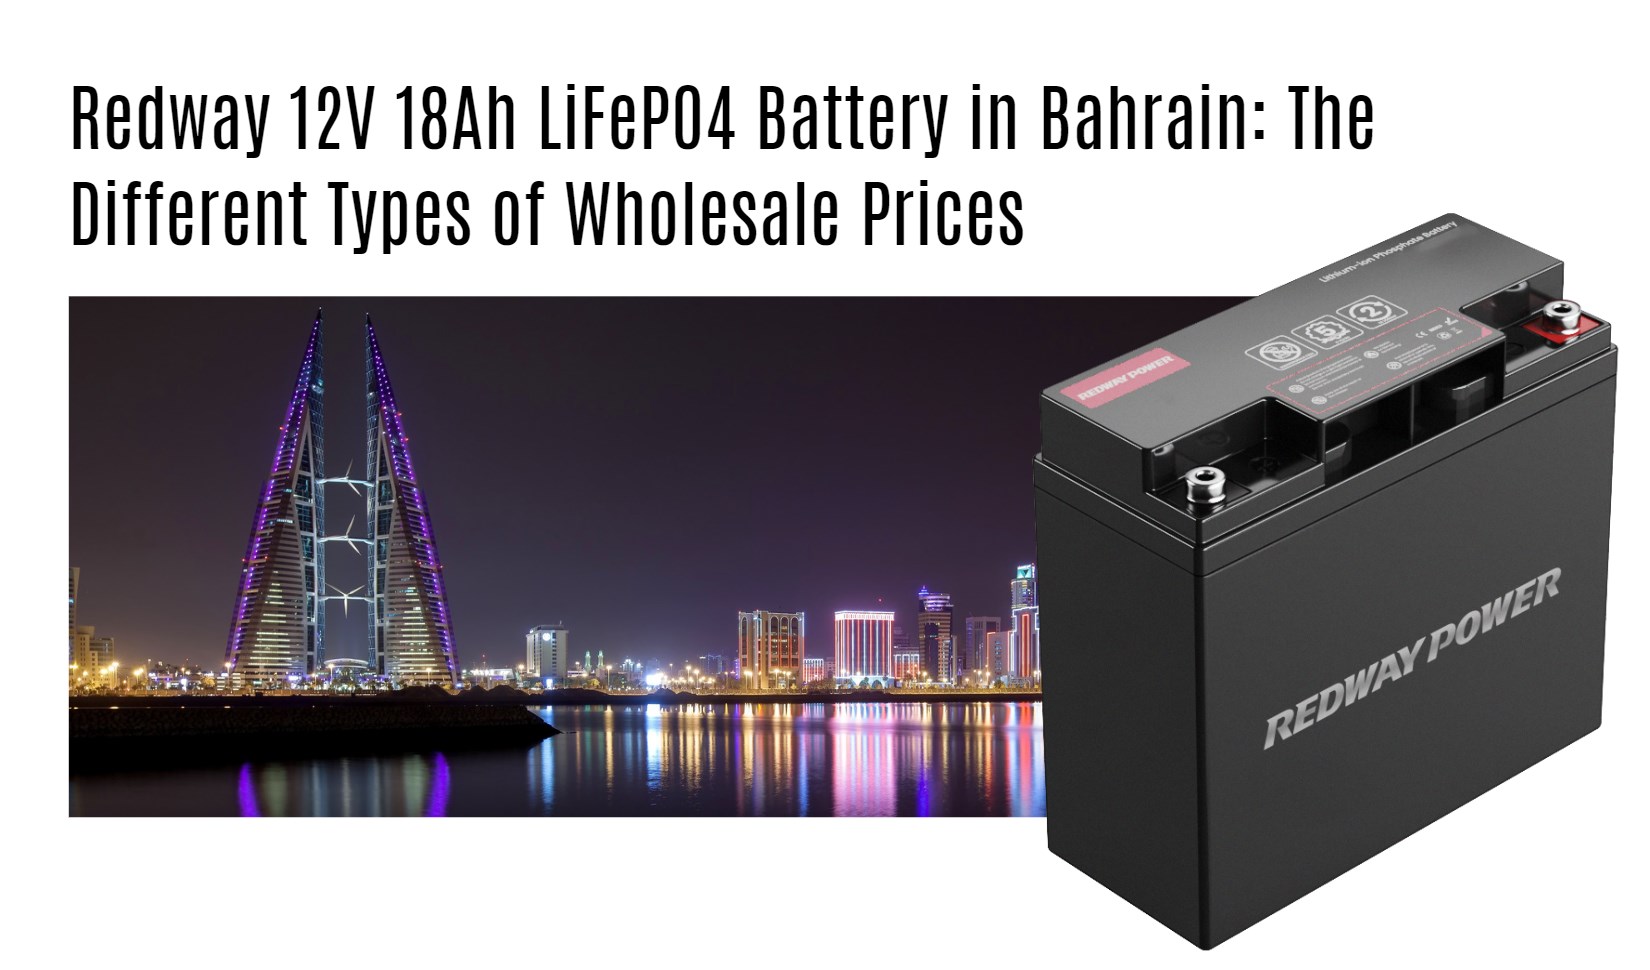 Redway 12V 18Ah LiFePO4 Battery in Bahrain: The Different Types of Wholesale Prices